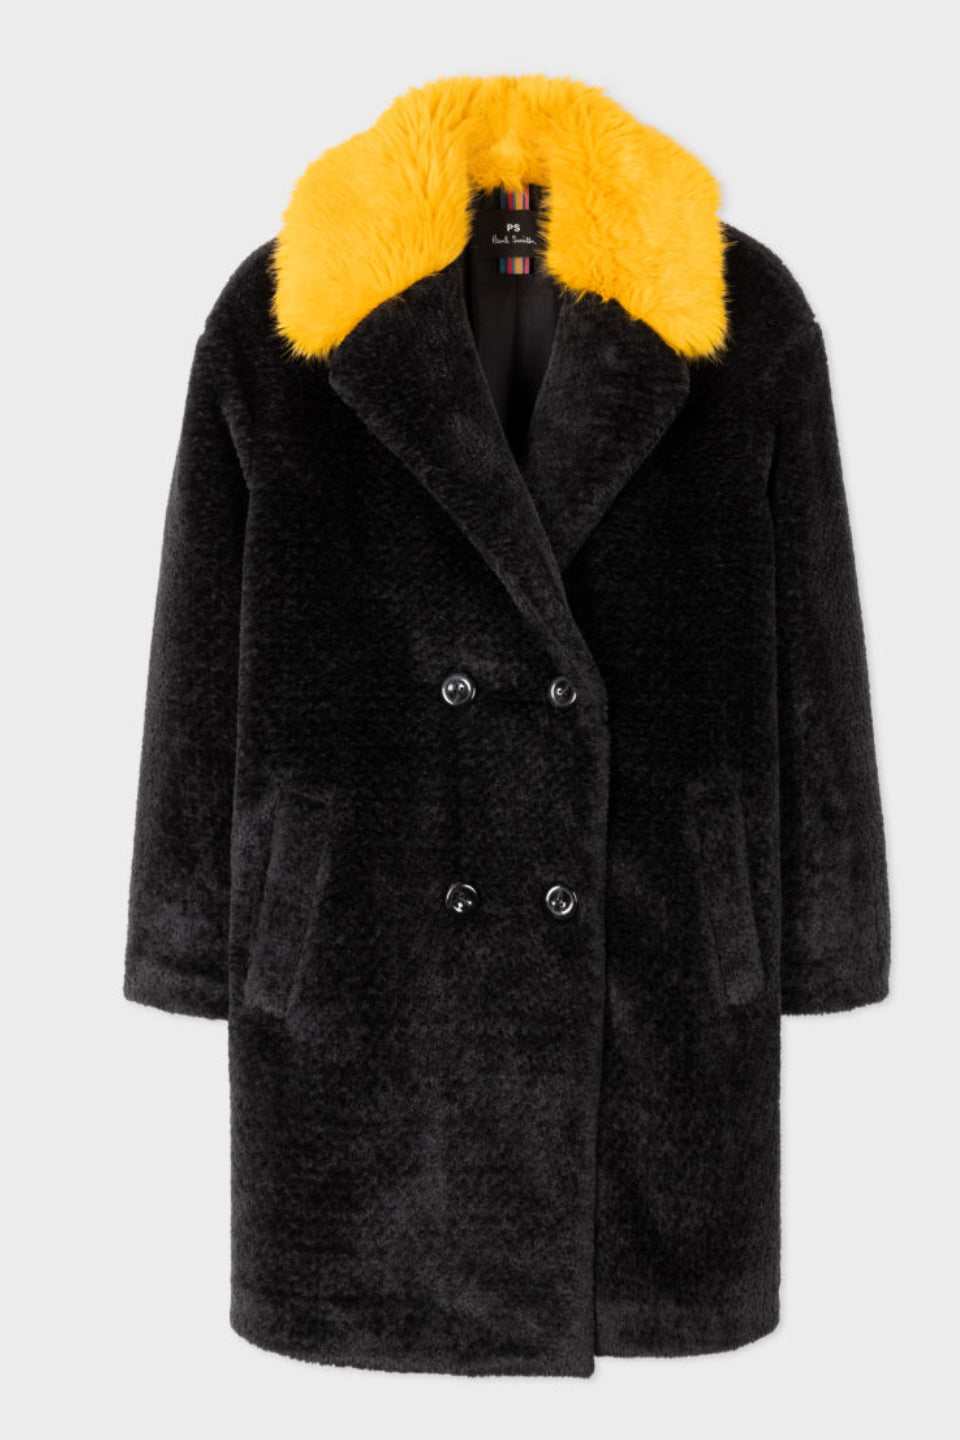 paul-smith-faux-fur-coat-with-yellow-collar